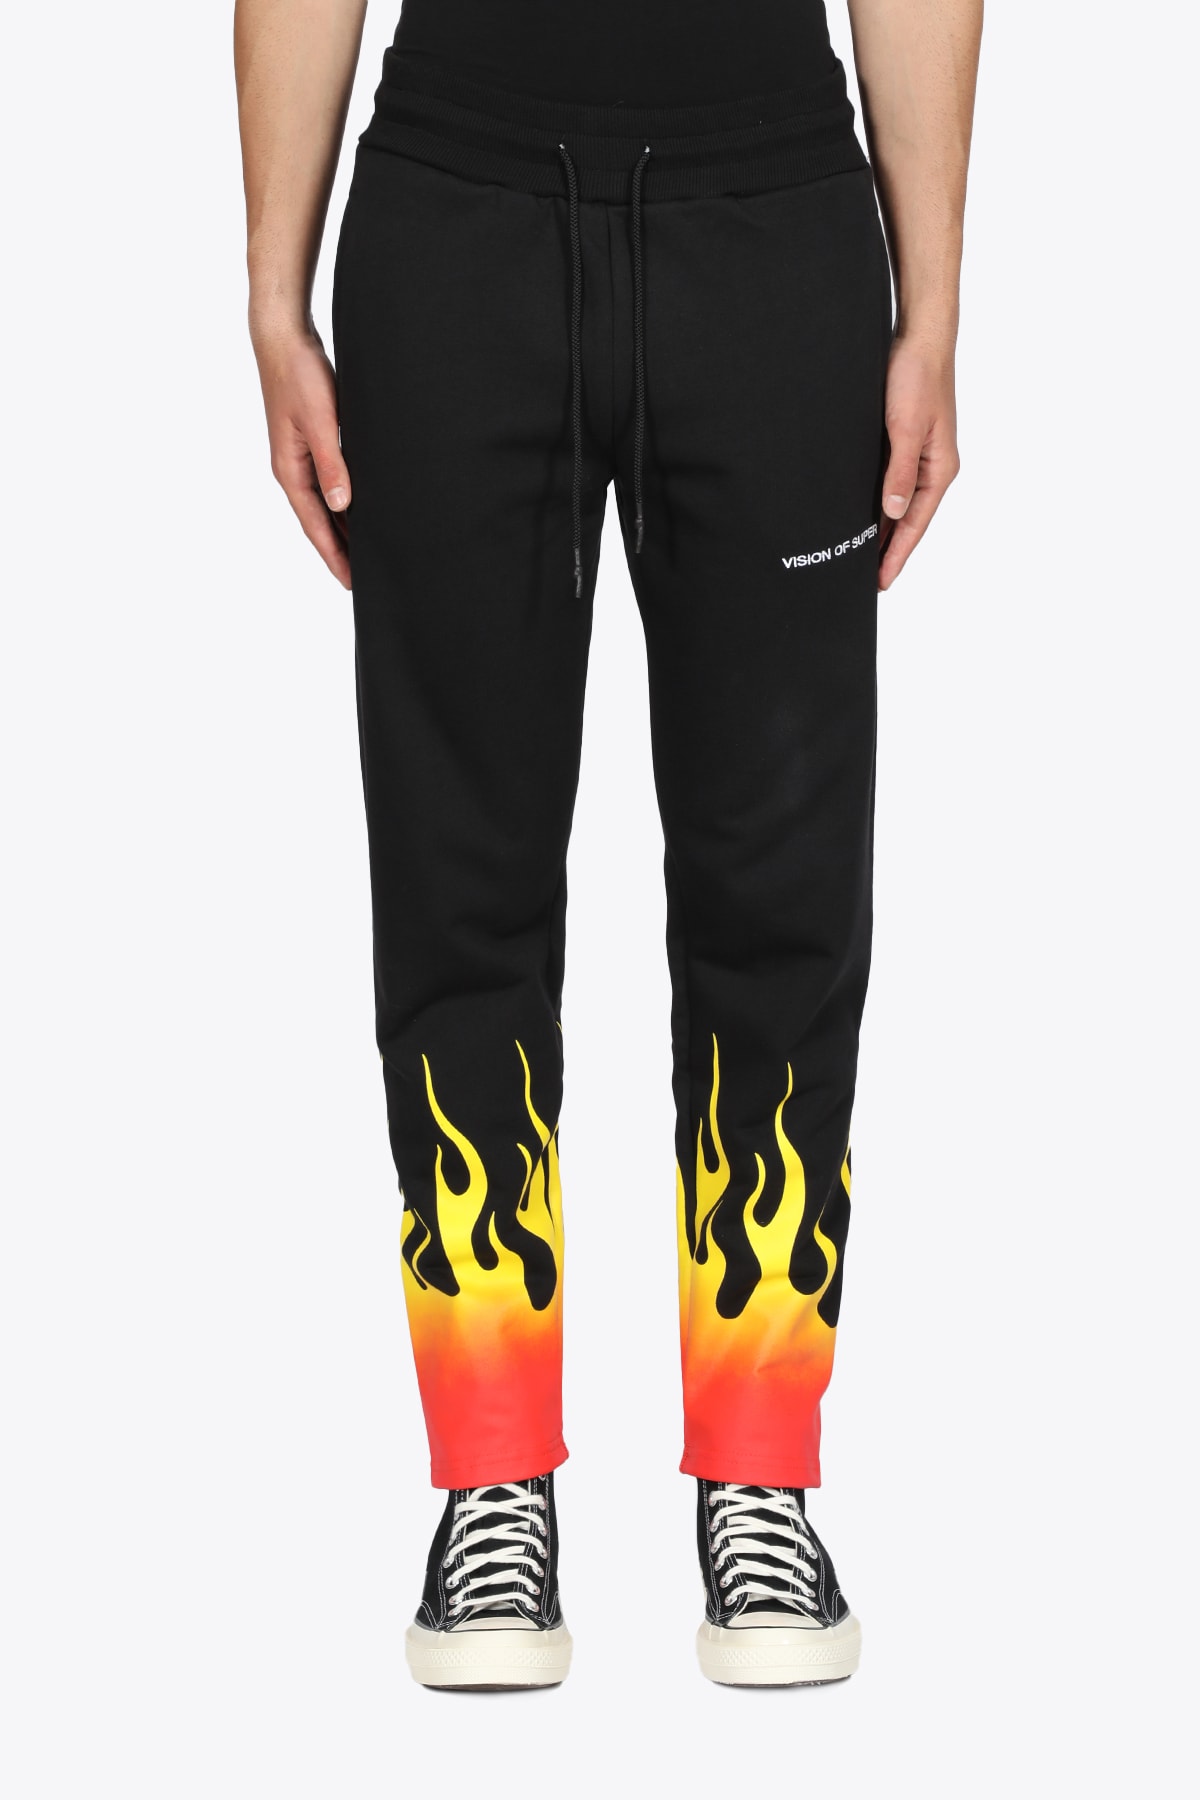 Vision of Super Vos/b16redsfu Cotton Black cotton sweatpant with red flames